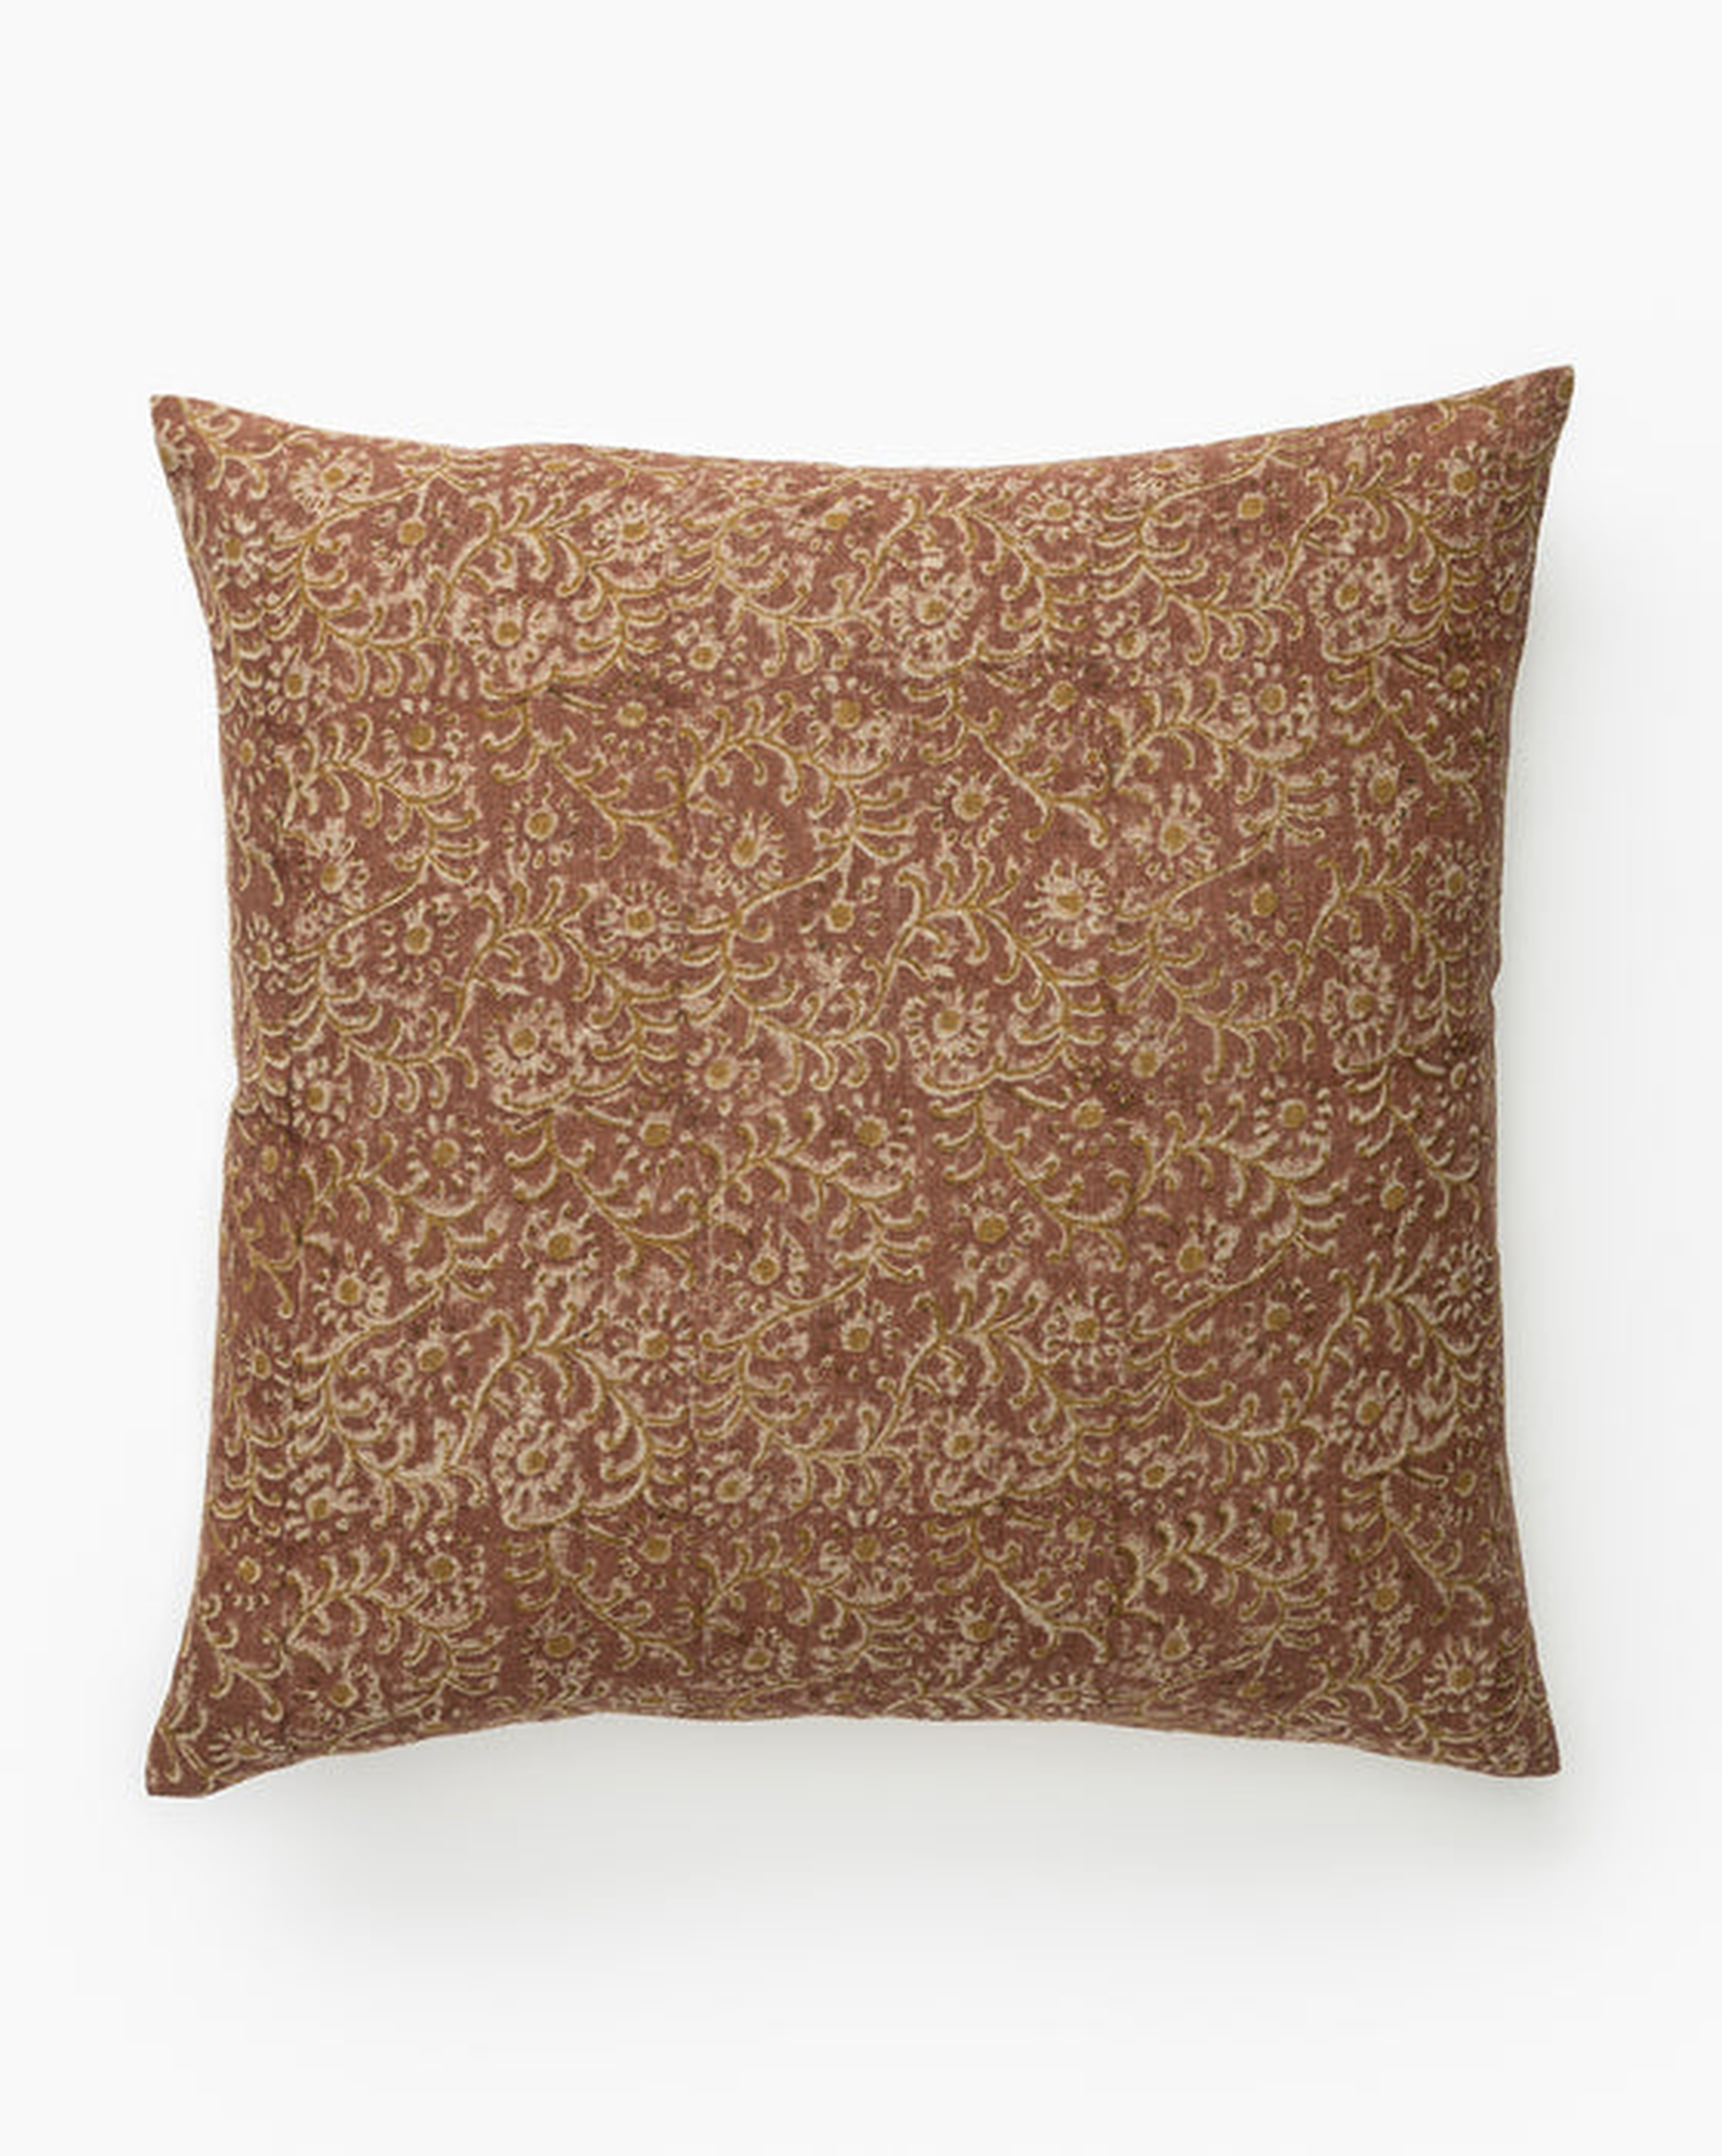 Catesby Pillow Cover - McGee & Co.